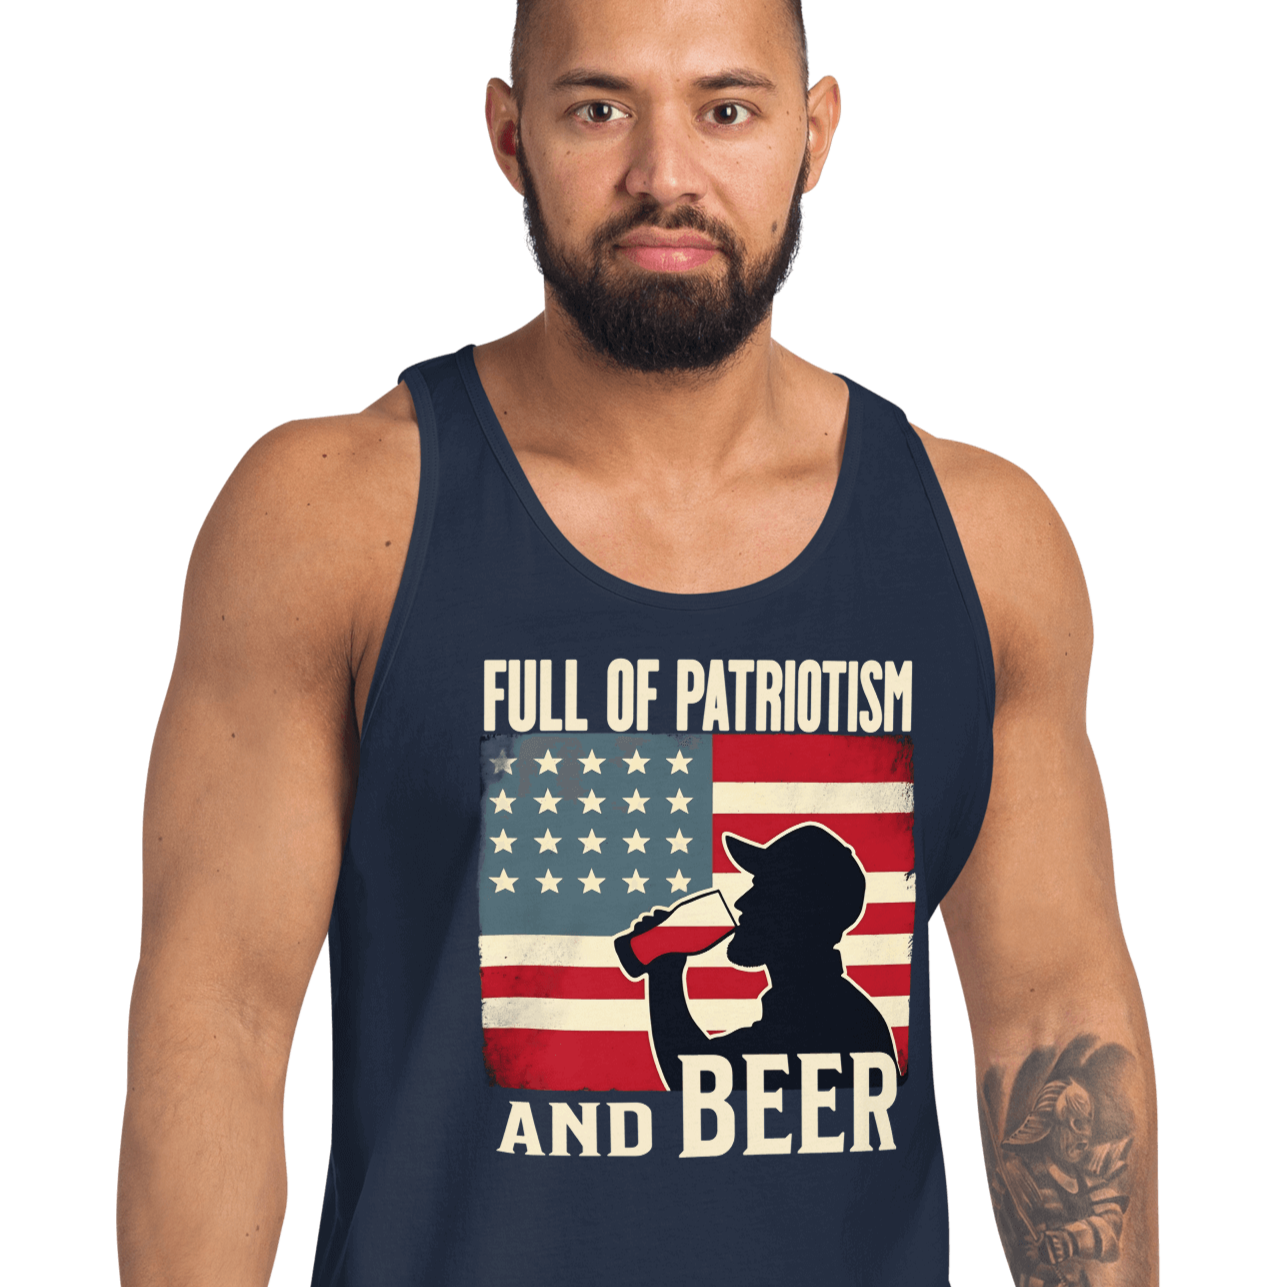 Tank top with Full of Patriotism and Beer text and a distressed American flag background. Perfect for 4th of July.